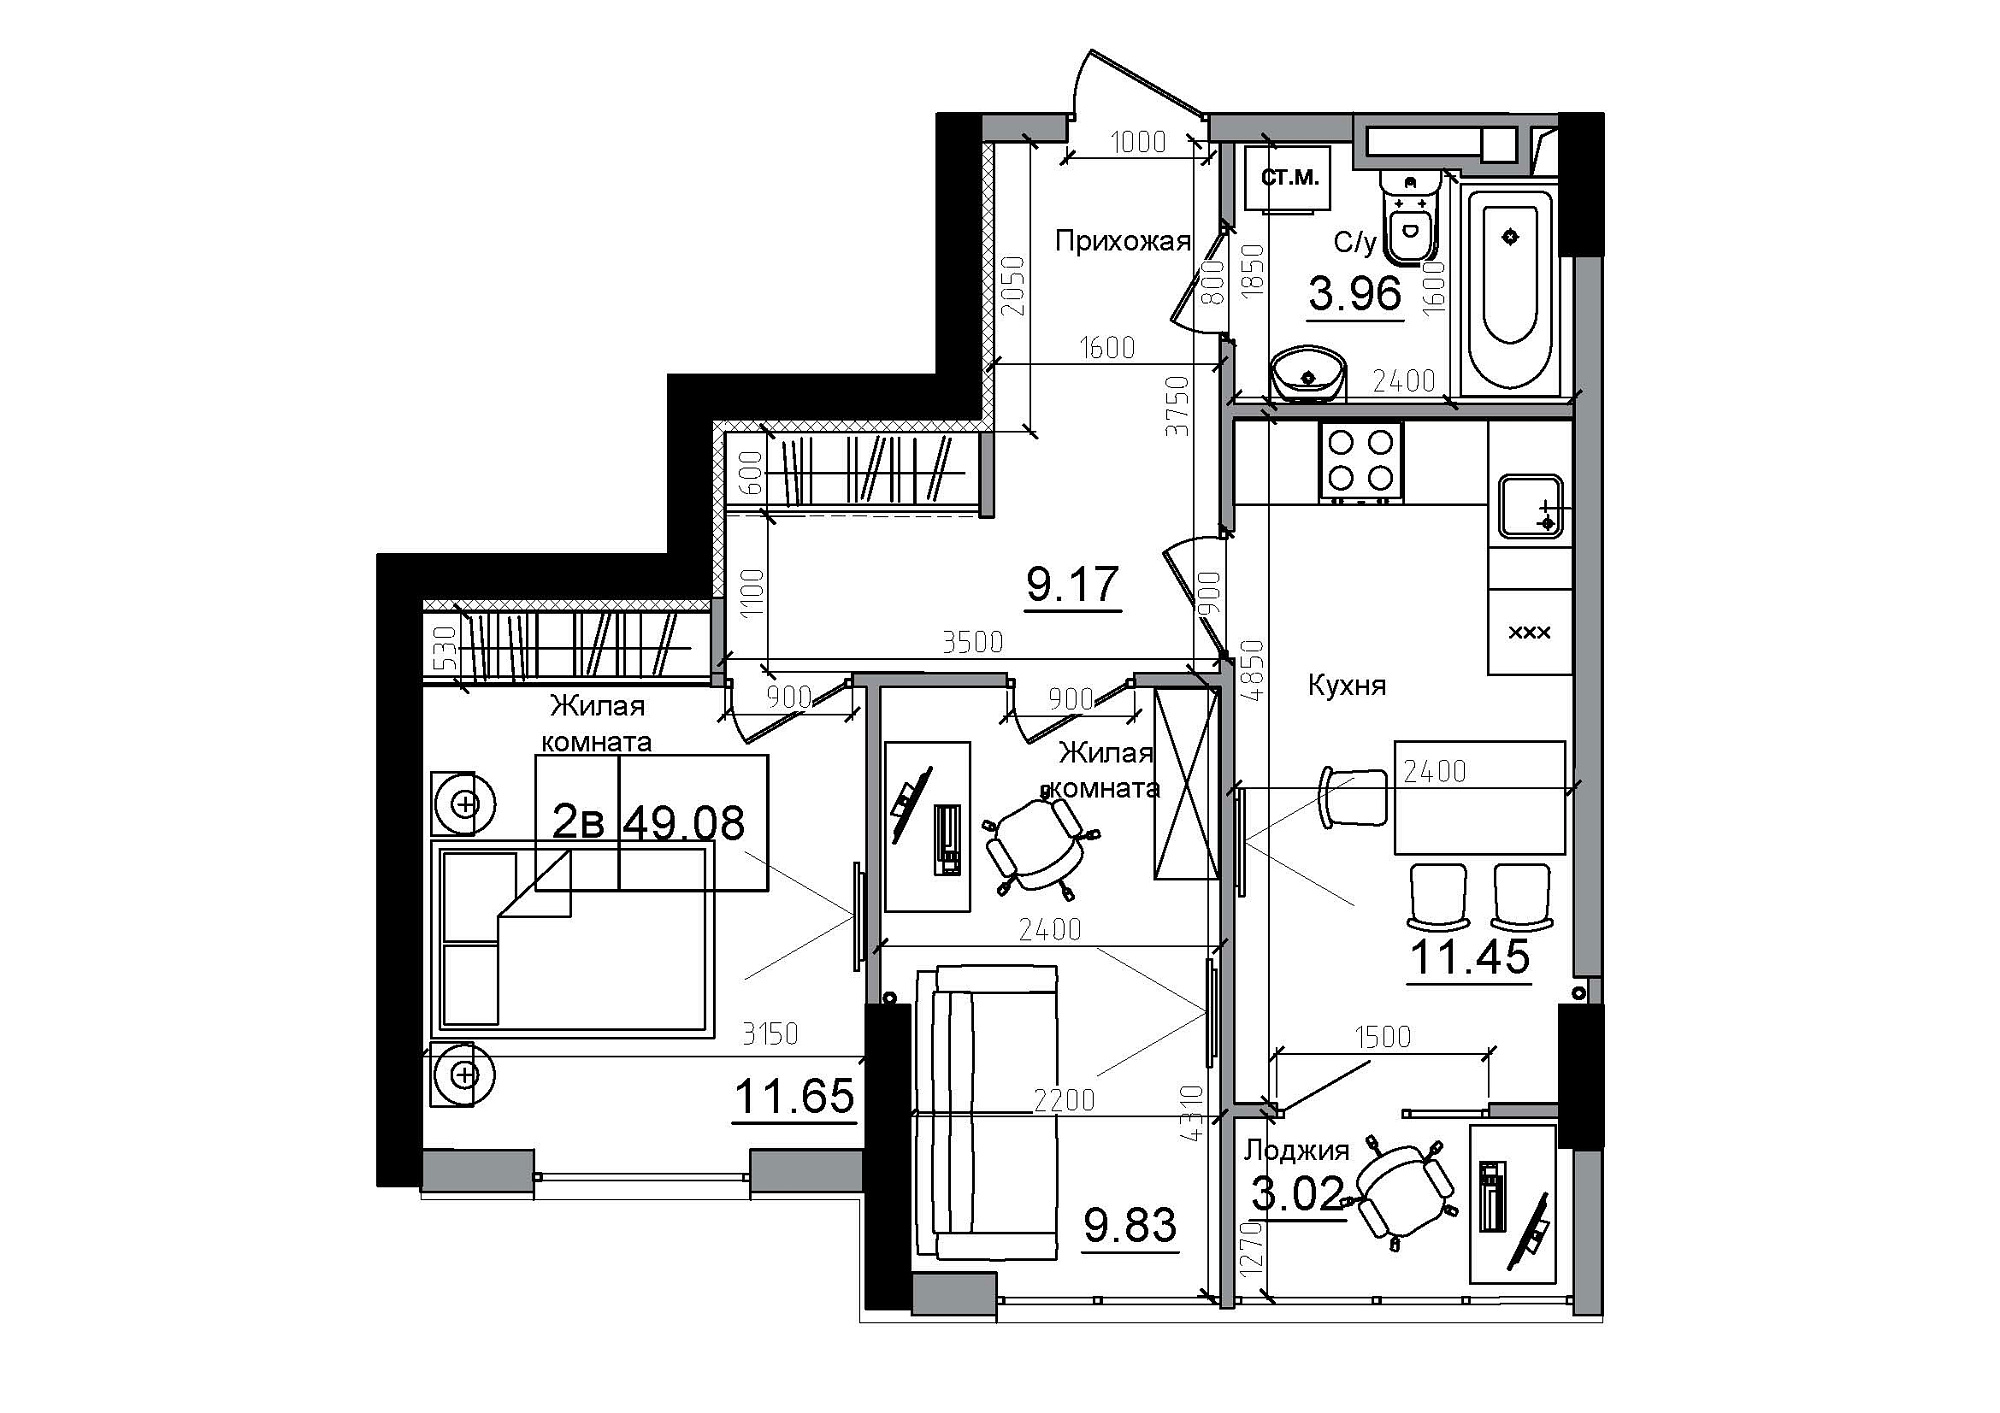 Planning 2-rm flats area 49.08m2, AB-12-12/00015.